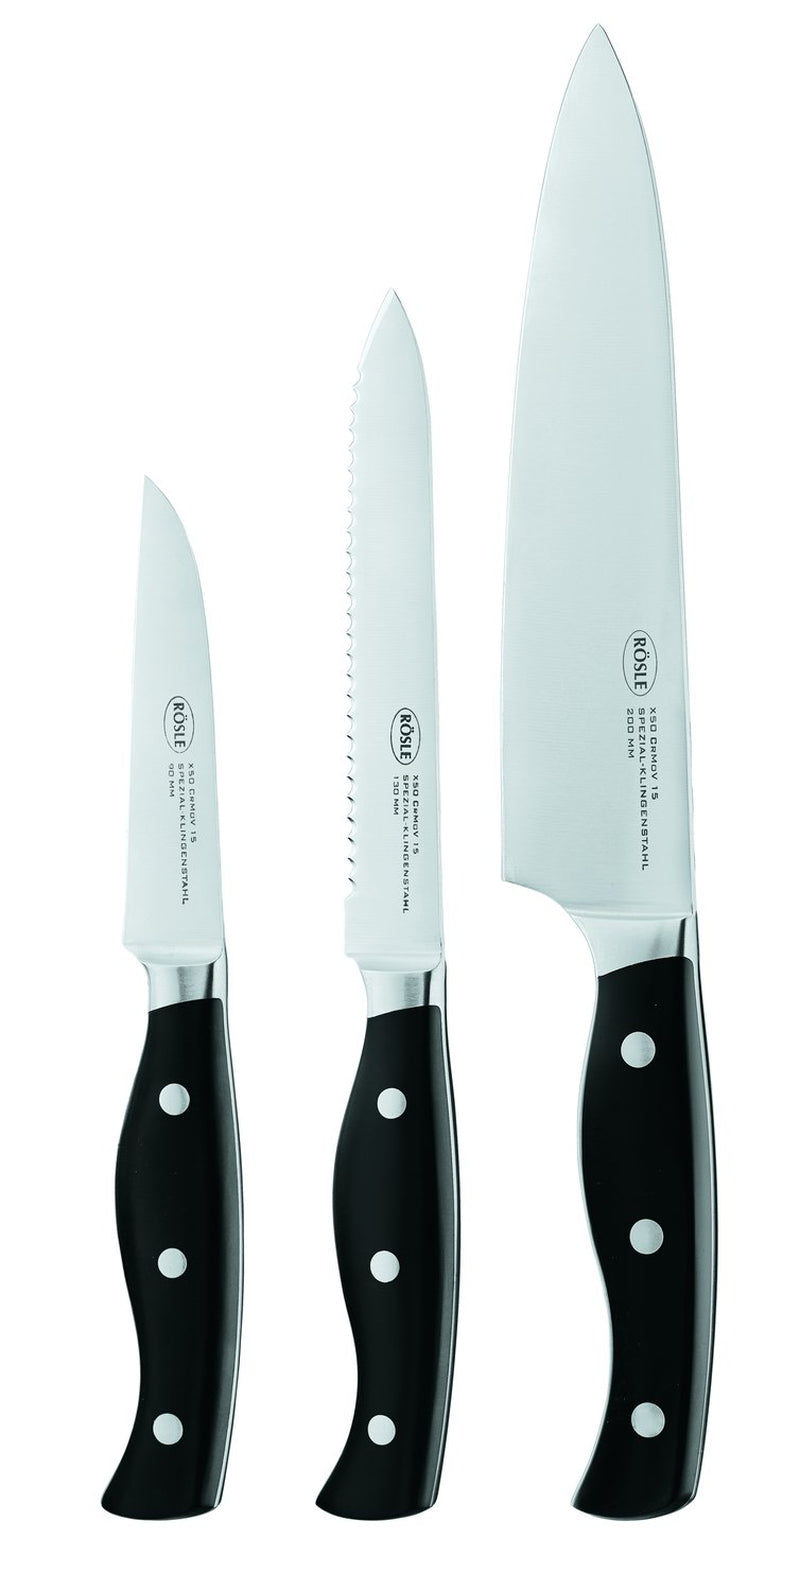 Rosle USA 25166 Stainless Steele Barbecue Knife Set (3 Piece)